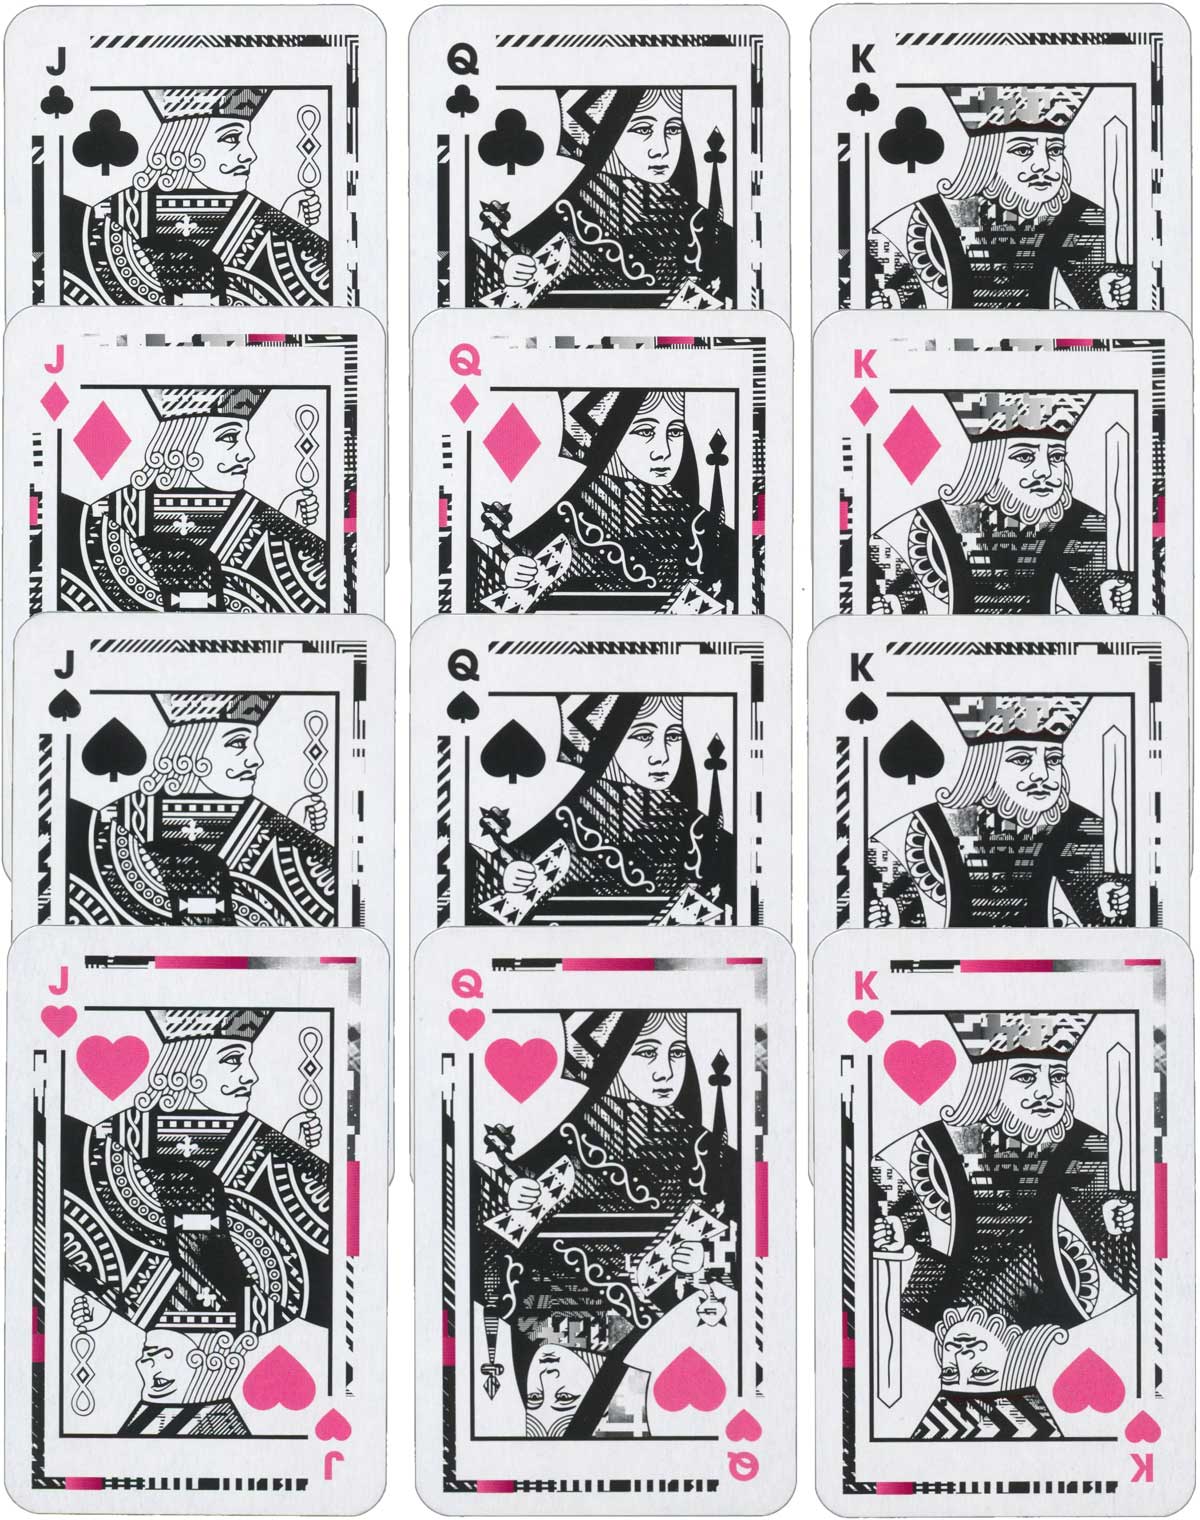 Giffgaff mobile network playing cards, 2015